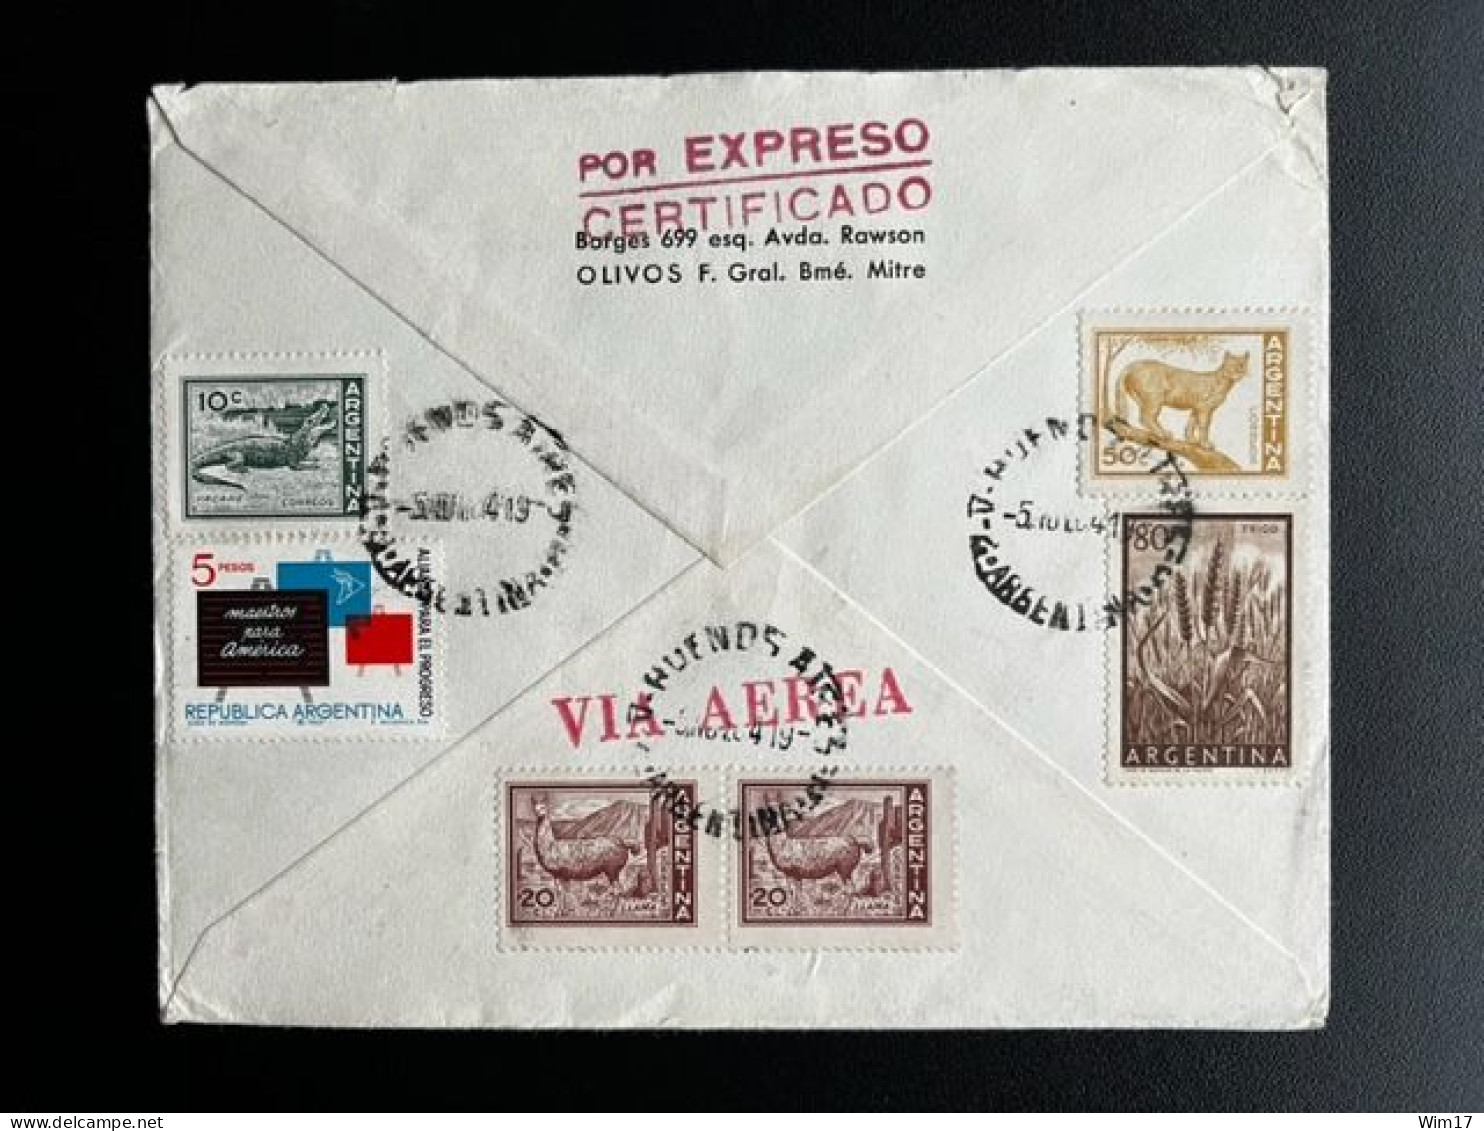 ARGENTINA 1964 REGISTERED EXPRESS AIR MAIL LETTER BUENOS AIRES TO WINTERMOOR 05-11-1964 CERTIFICADO EXPRESO - Briefe U. Dokumente